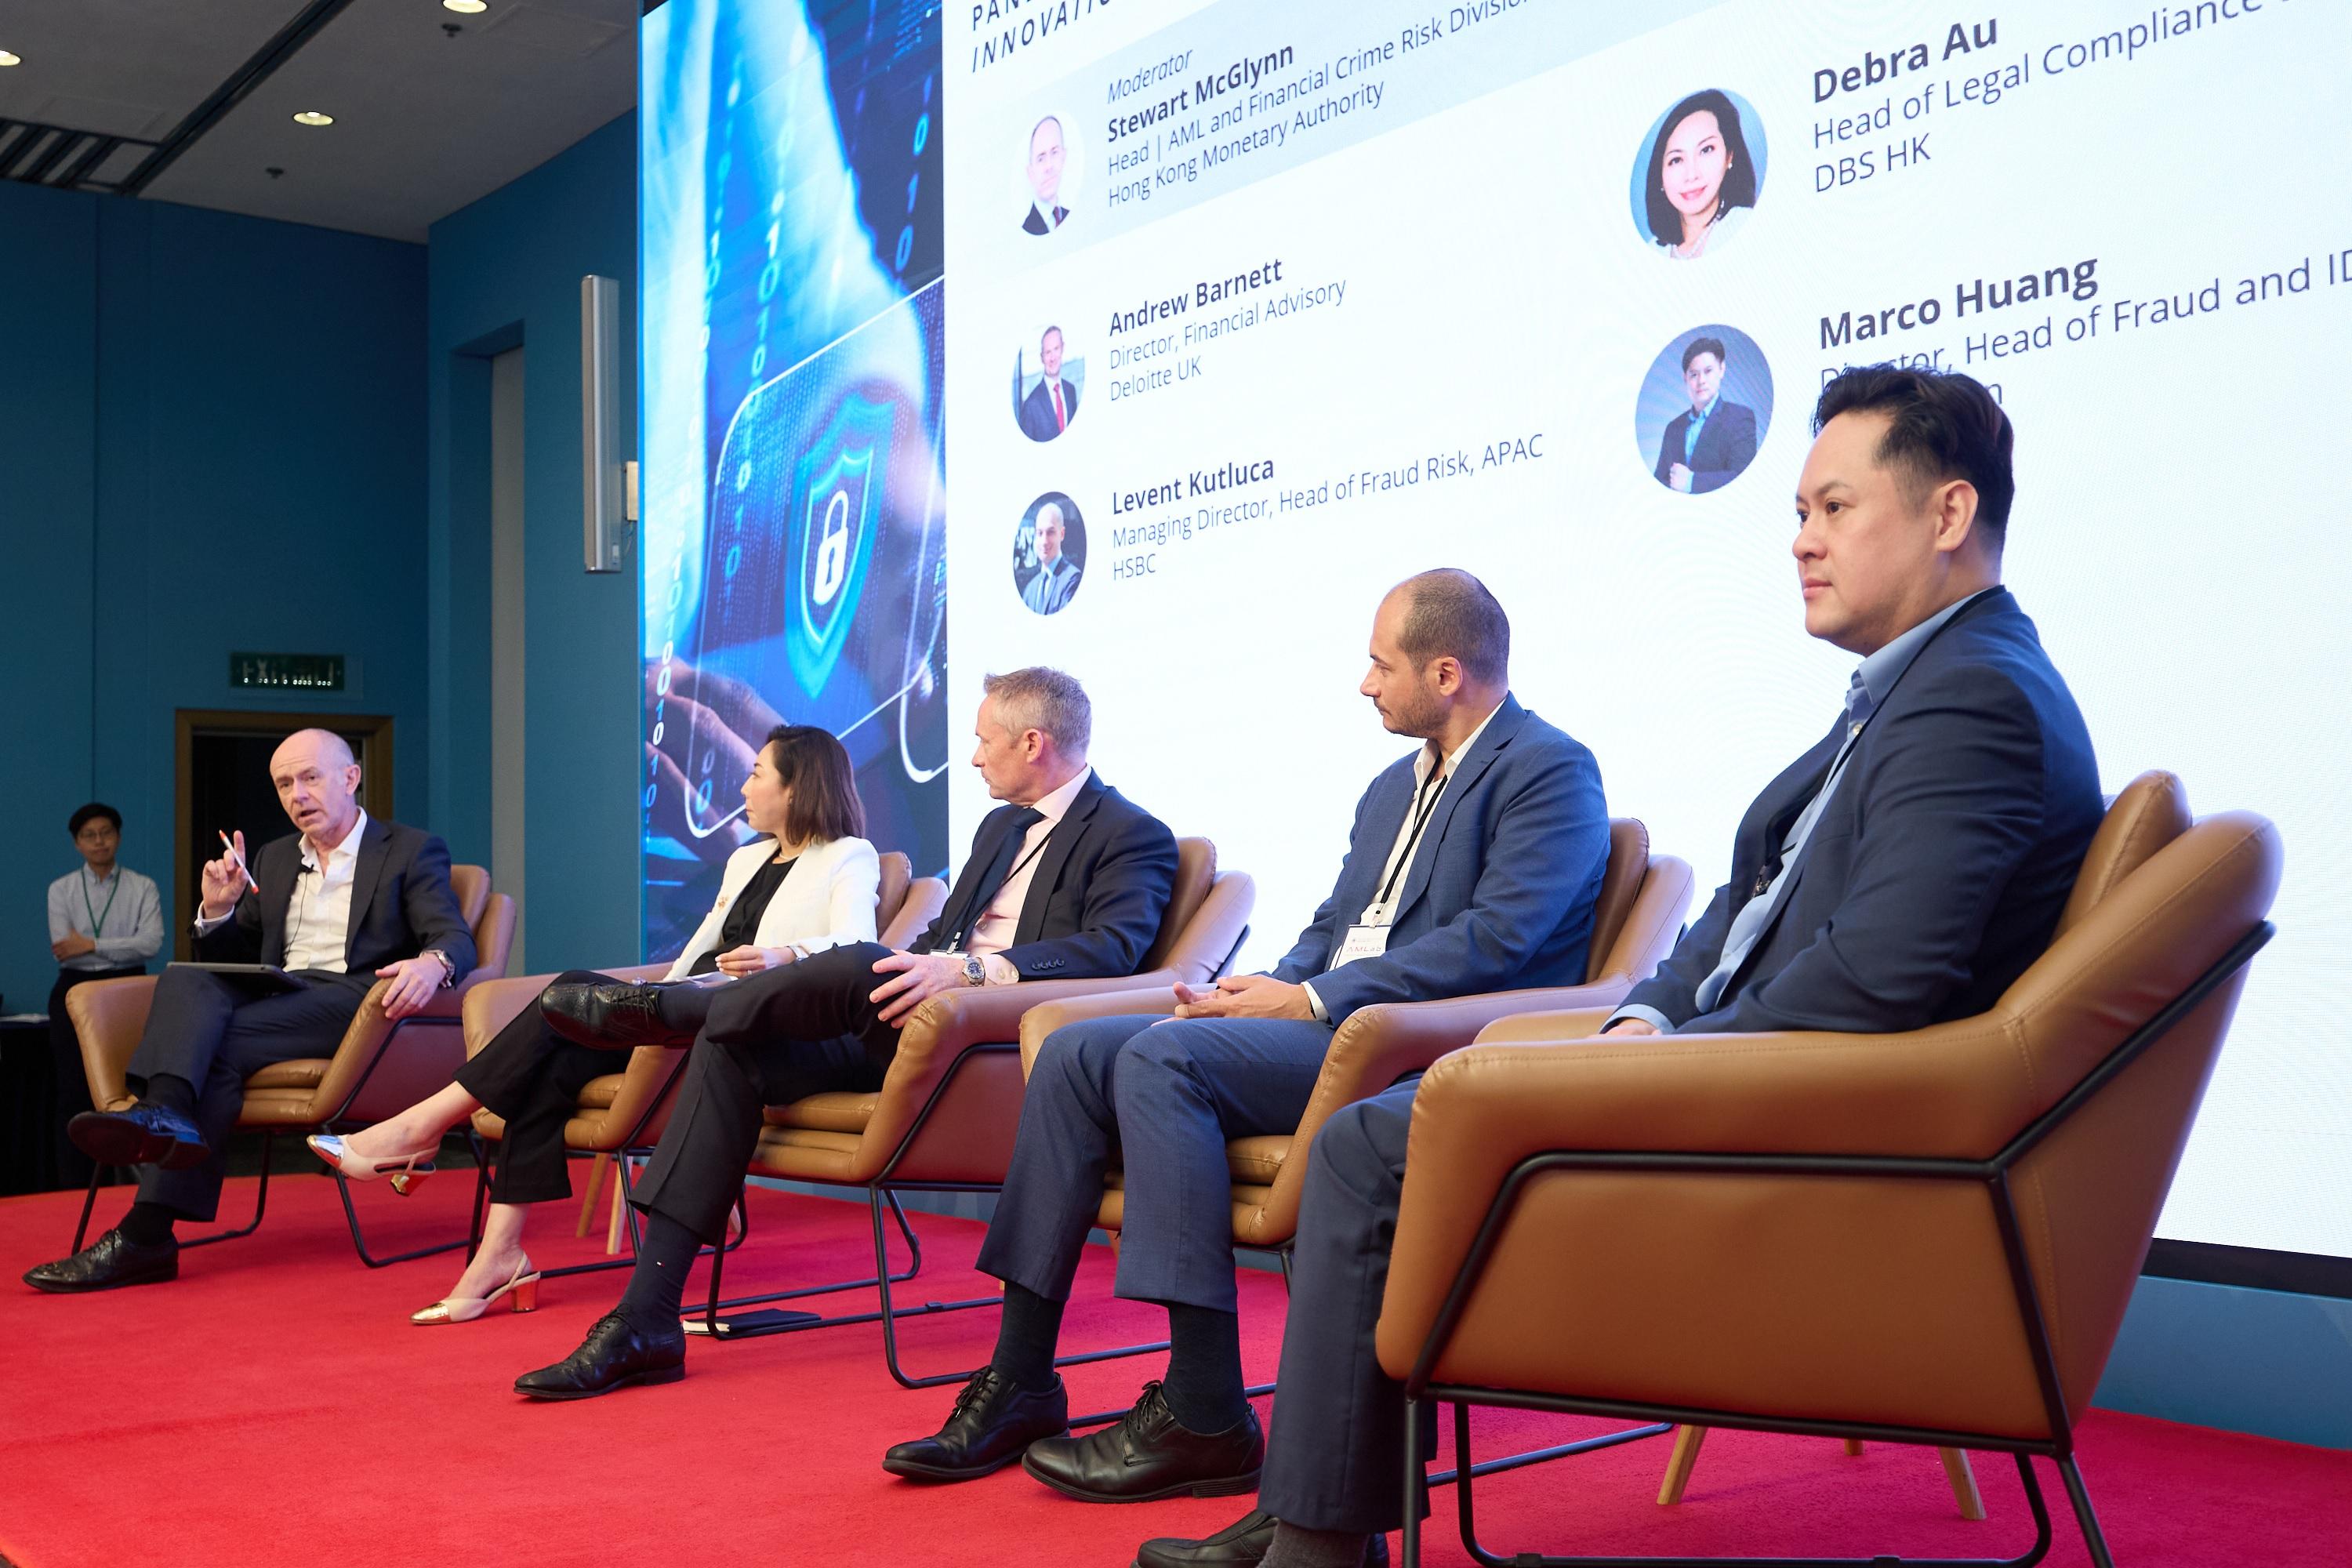 The Hong Kong Monetary Authority (HKMA) and Cyberport co-hosted the fourth Anti-Money Laundering Regtech Lab (AMLab 4) today (June 7), with support from Deloitte. Photo shows senior representatives from the HKMA, banks and technology firms sharing insights in a panel discussion on using Regtech solutions to detect and disrupt fraud.